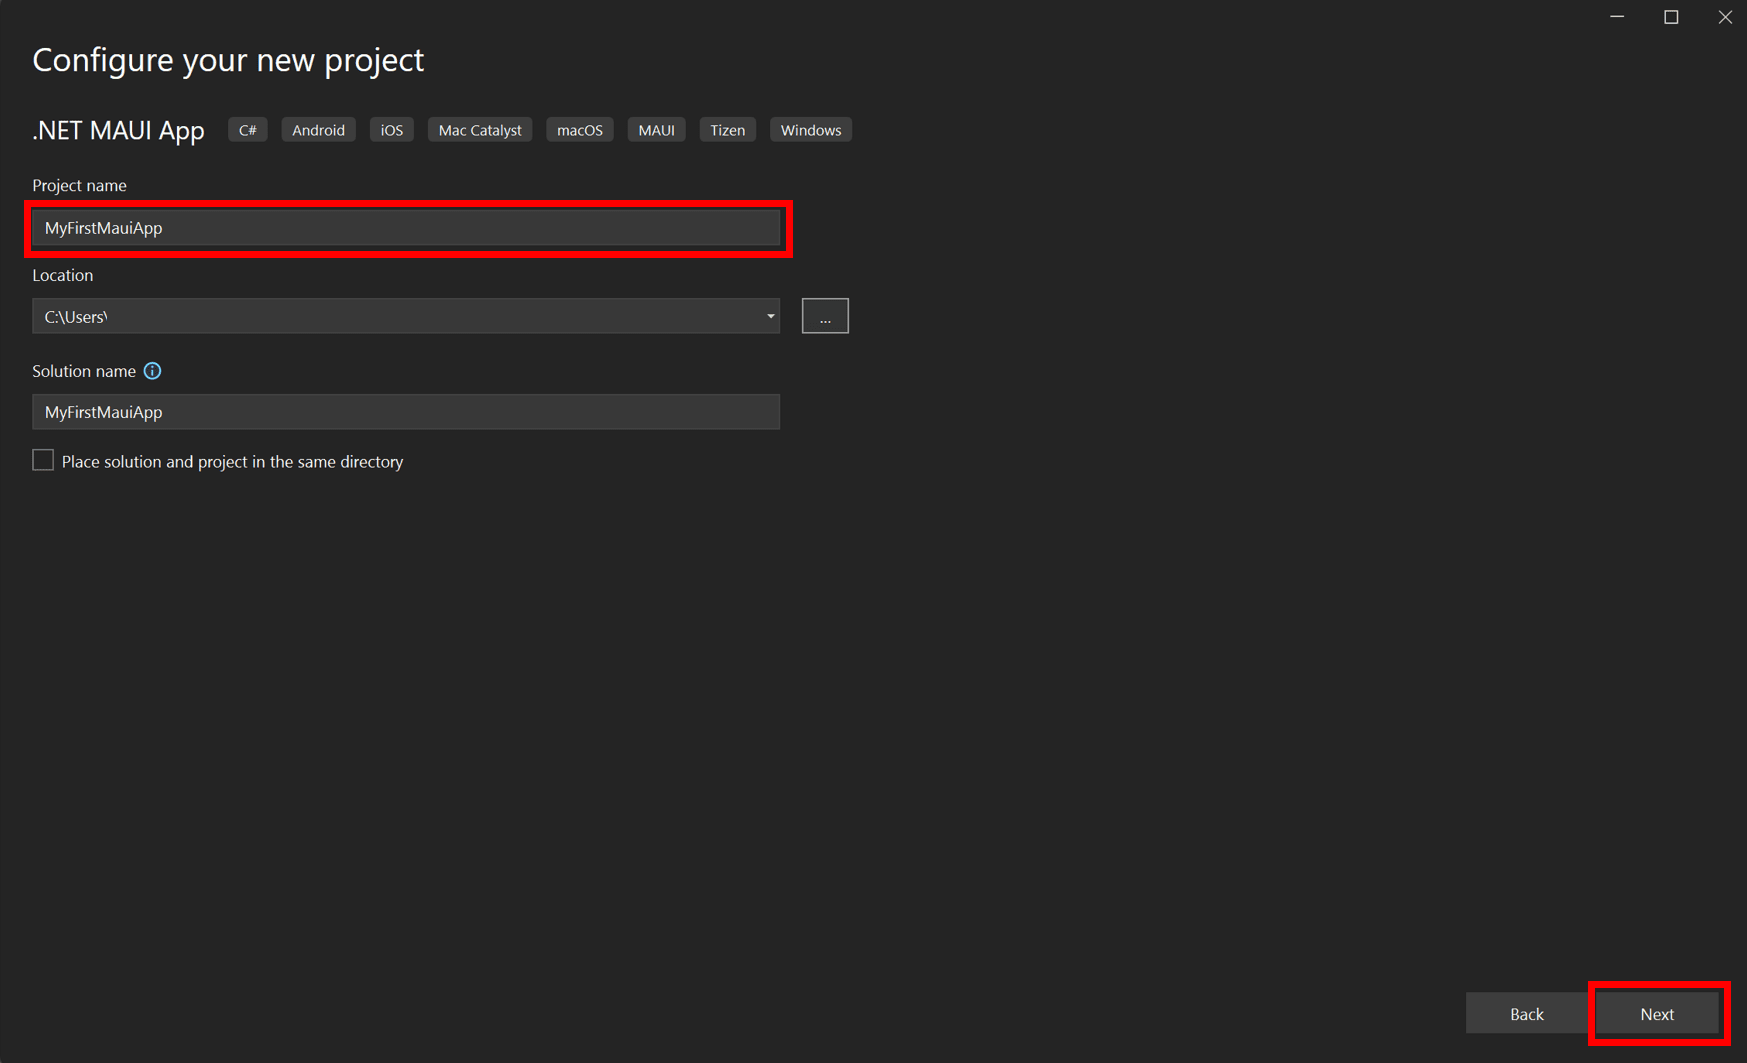 Visual Studio configure your new project dialog with MyFirstMauiApp as the project name